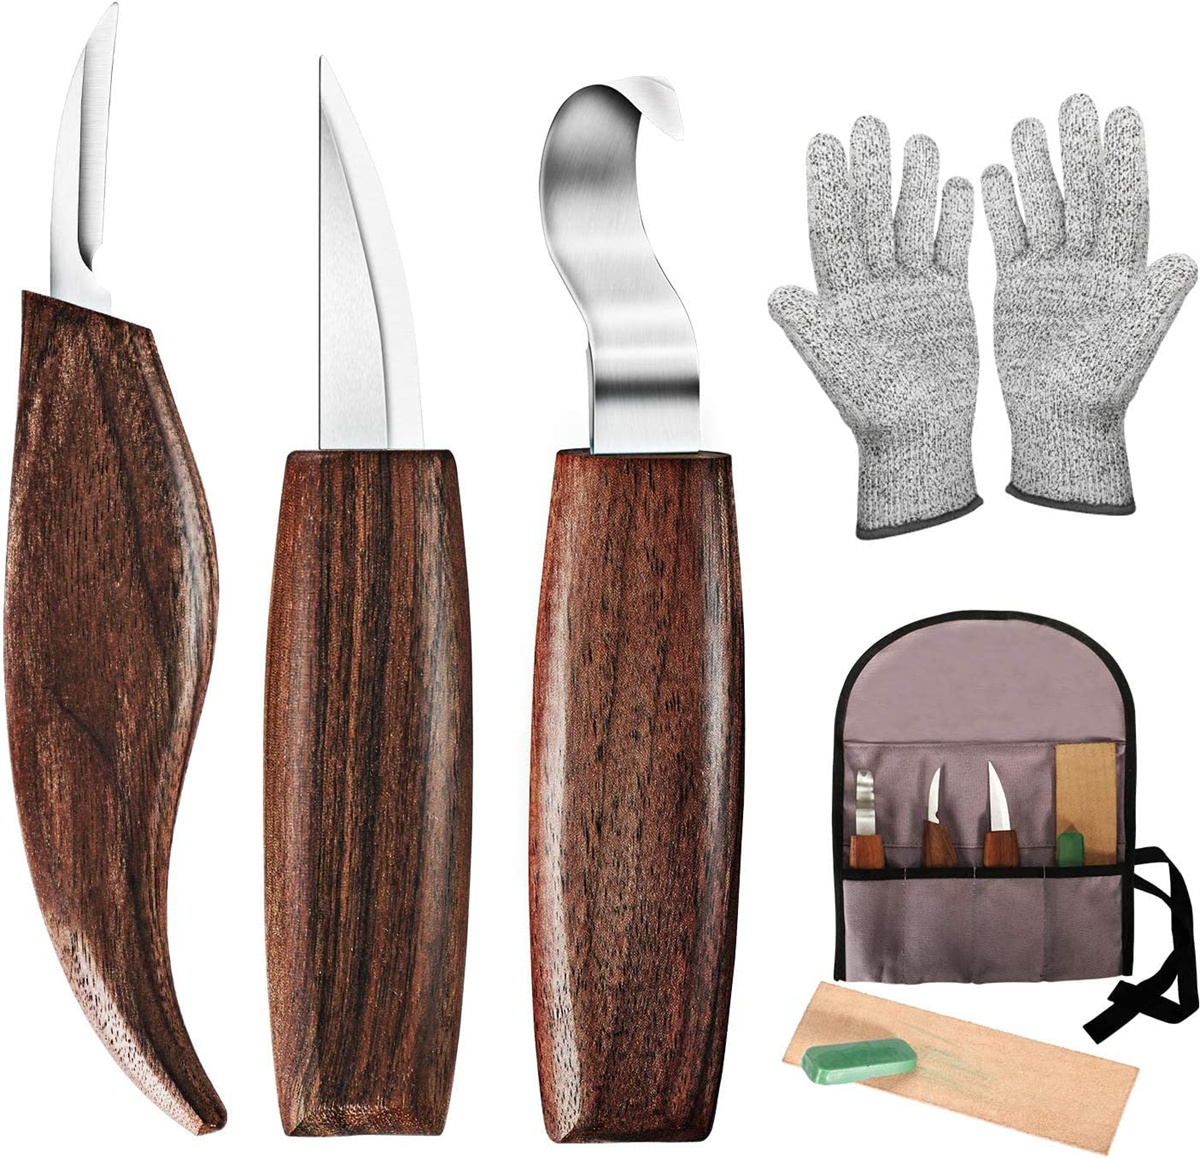 7 in 1 Wood Carving Tools Kit with Carving Hook Knife Wood Whittling Knife Chip Carving Knife Gloves Carving Knife Sharpener for Beginners Woodworking kit